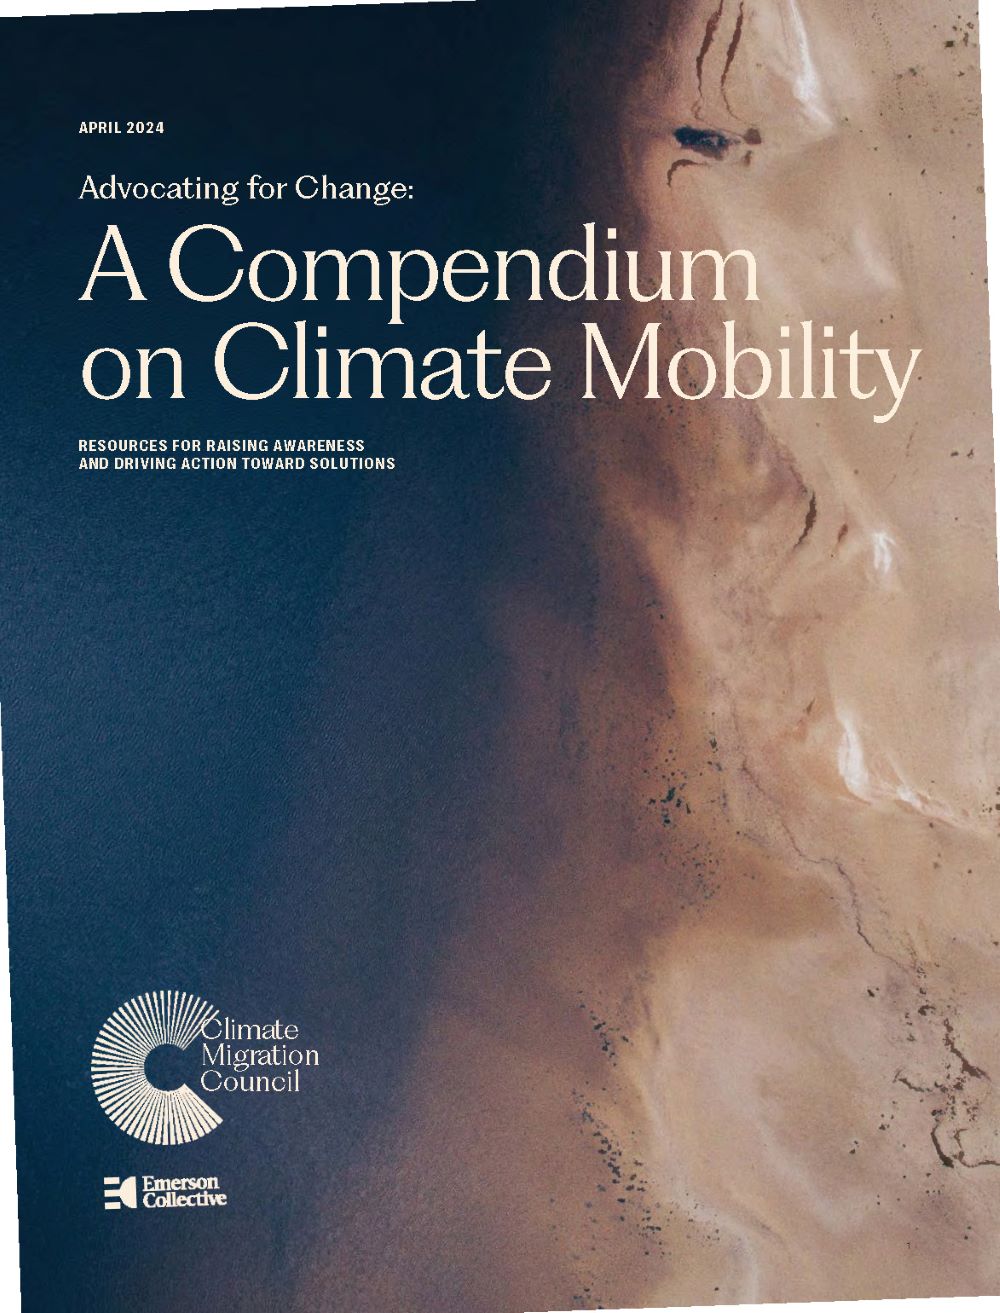 Advocating for Change: A Compendium on Climate Mobility